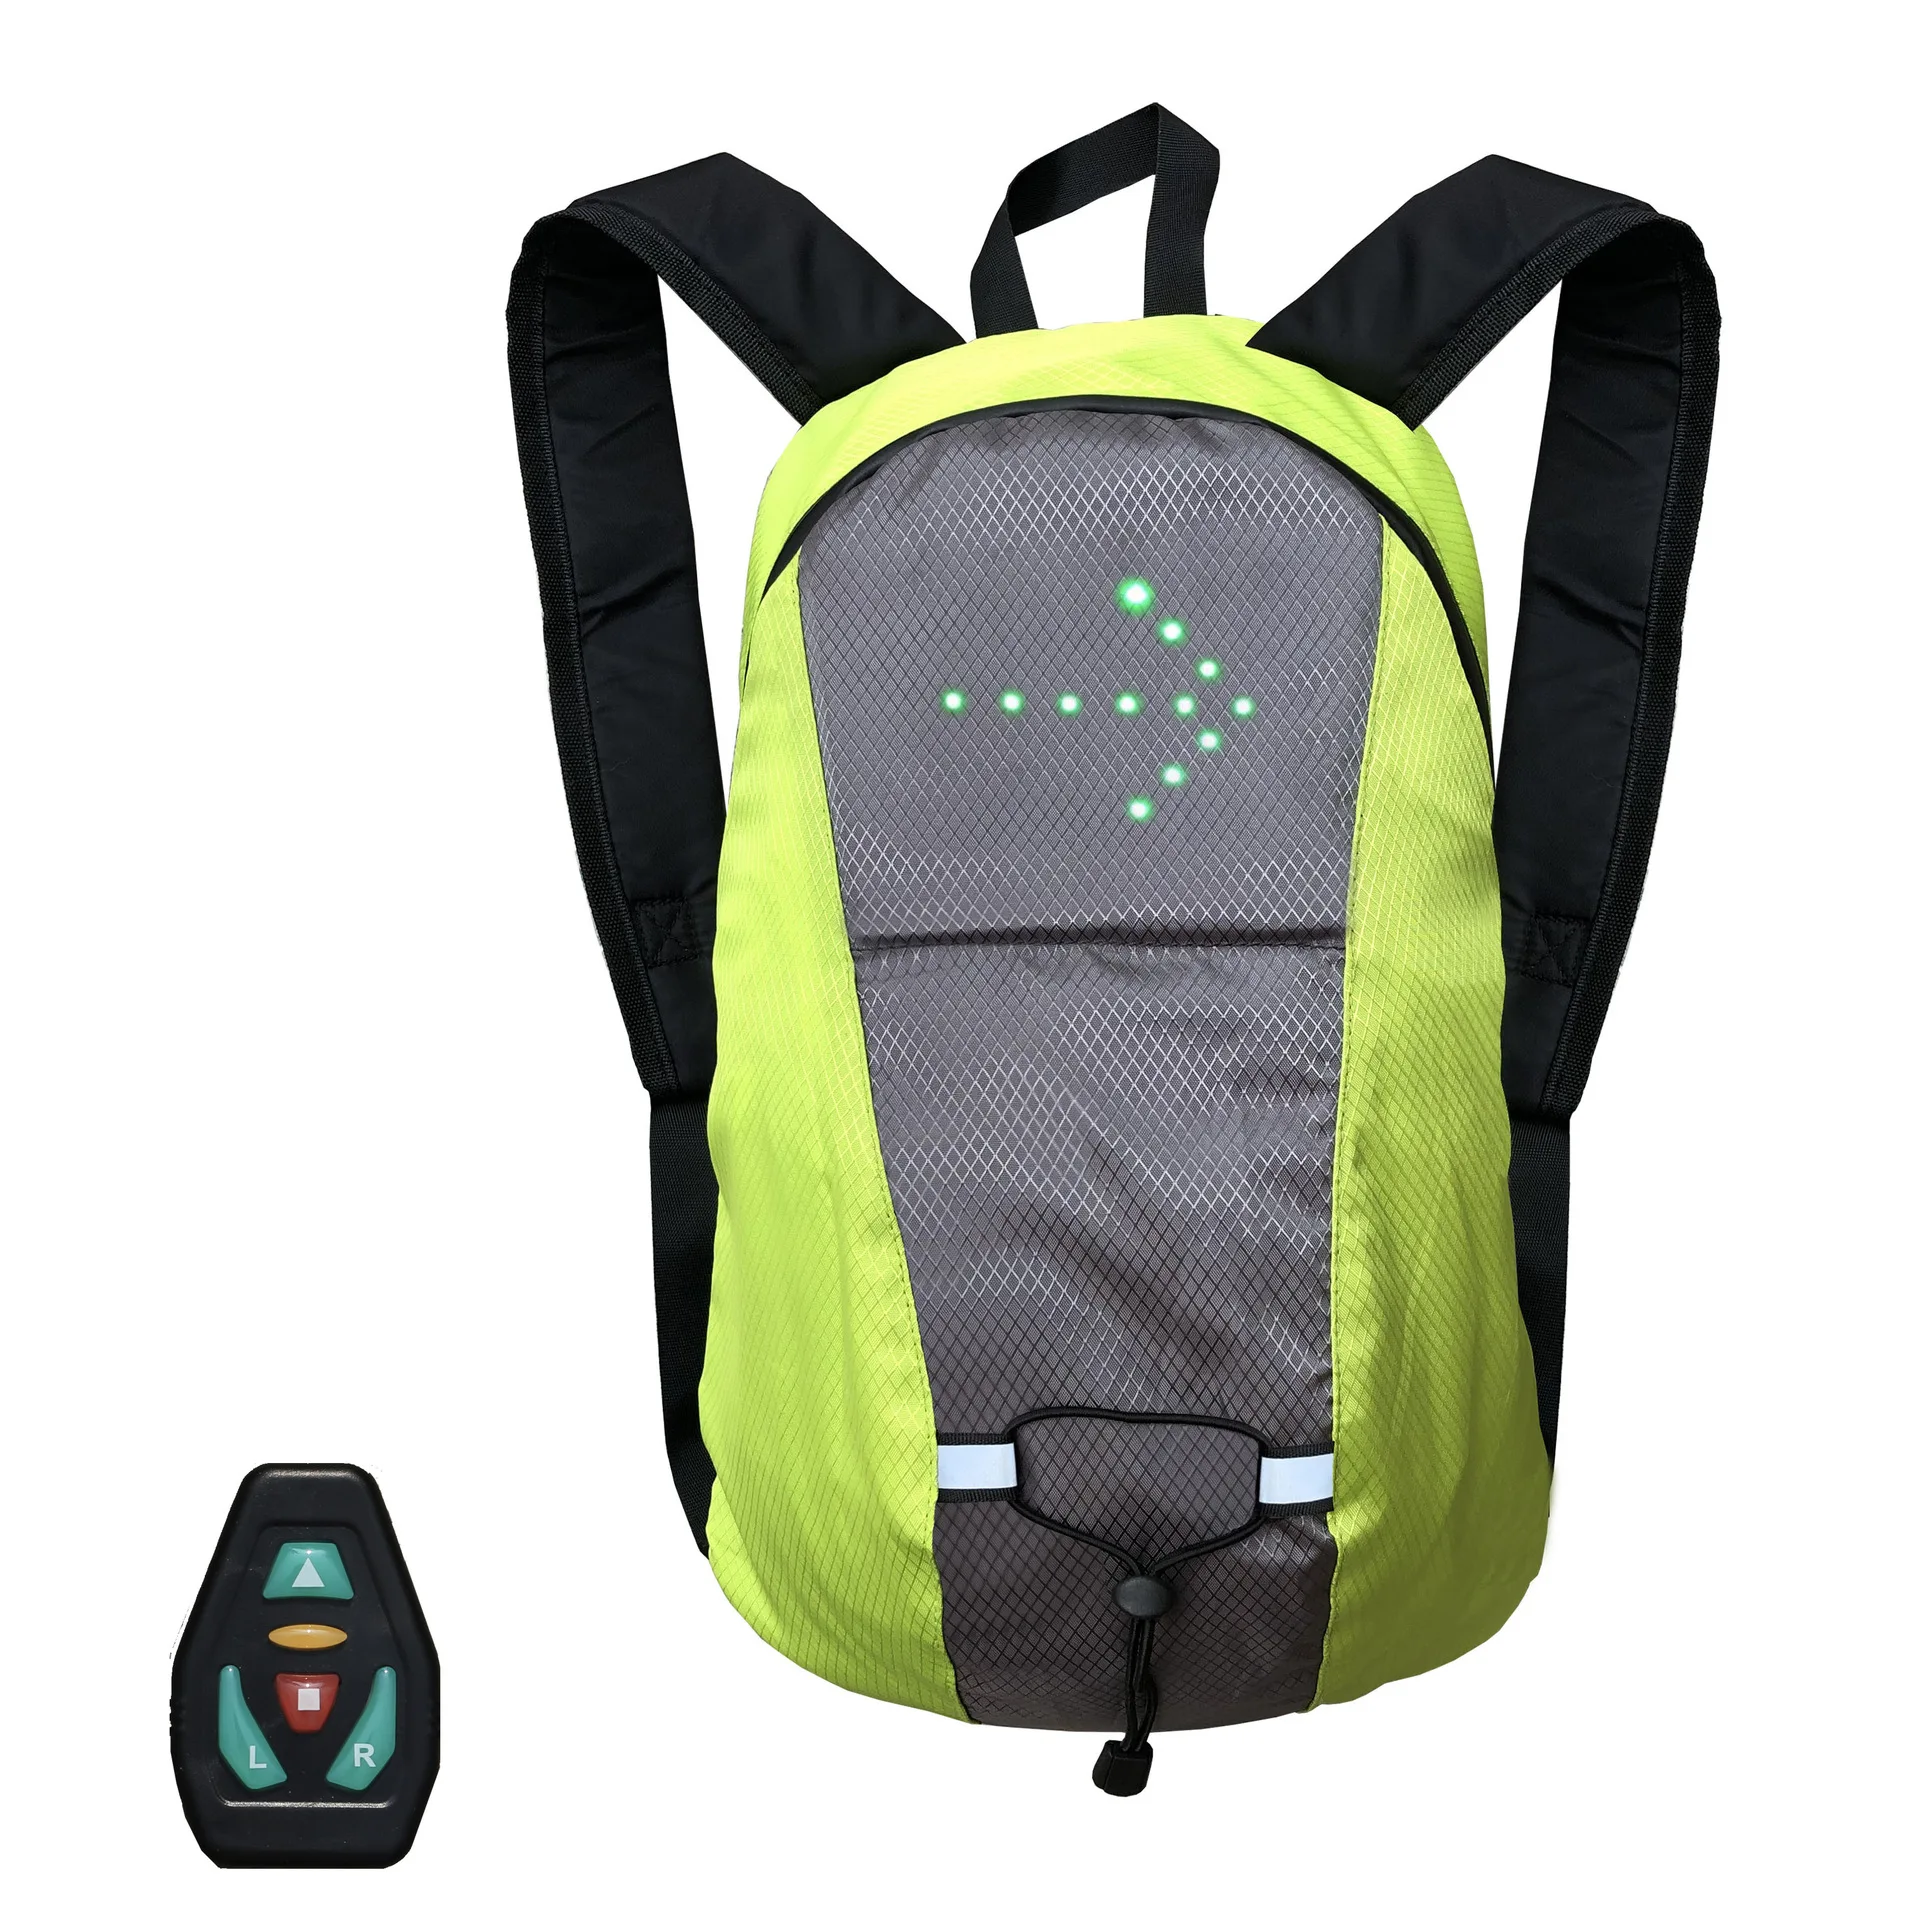 Electric scoote bag for xiaomi m365 ninebot max g30 xiaomi pro 2 kugoo s3 LED turn signal light scooter parts backpack  m365